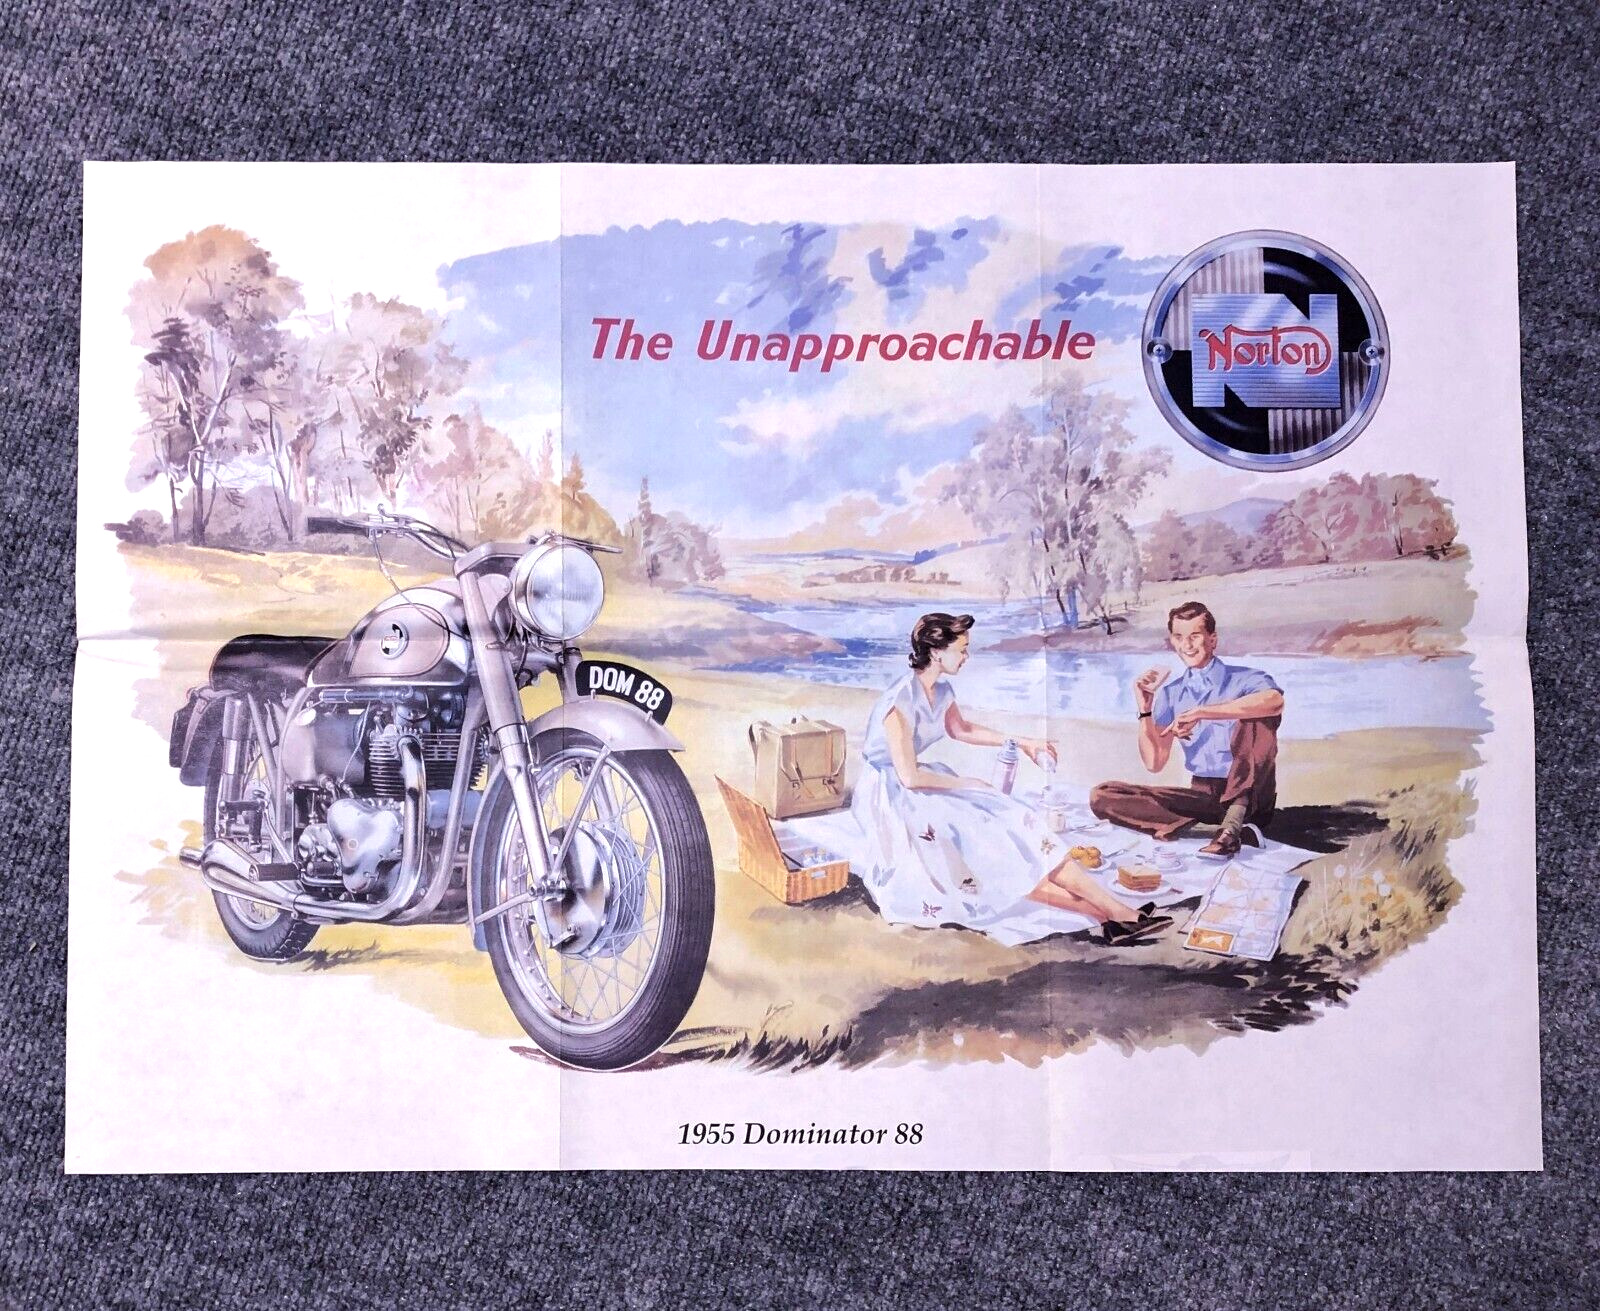 LARGE NORTON MOTORCYCLE POSTER 1955 DOMINATOR 88 500 FEATHERBED